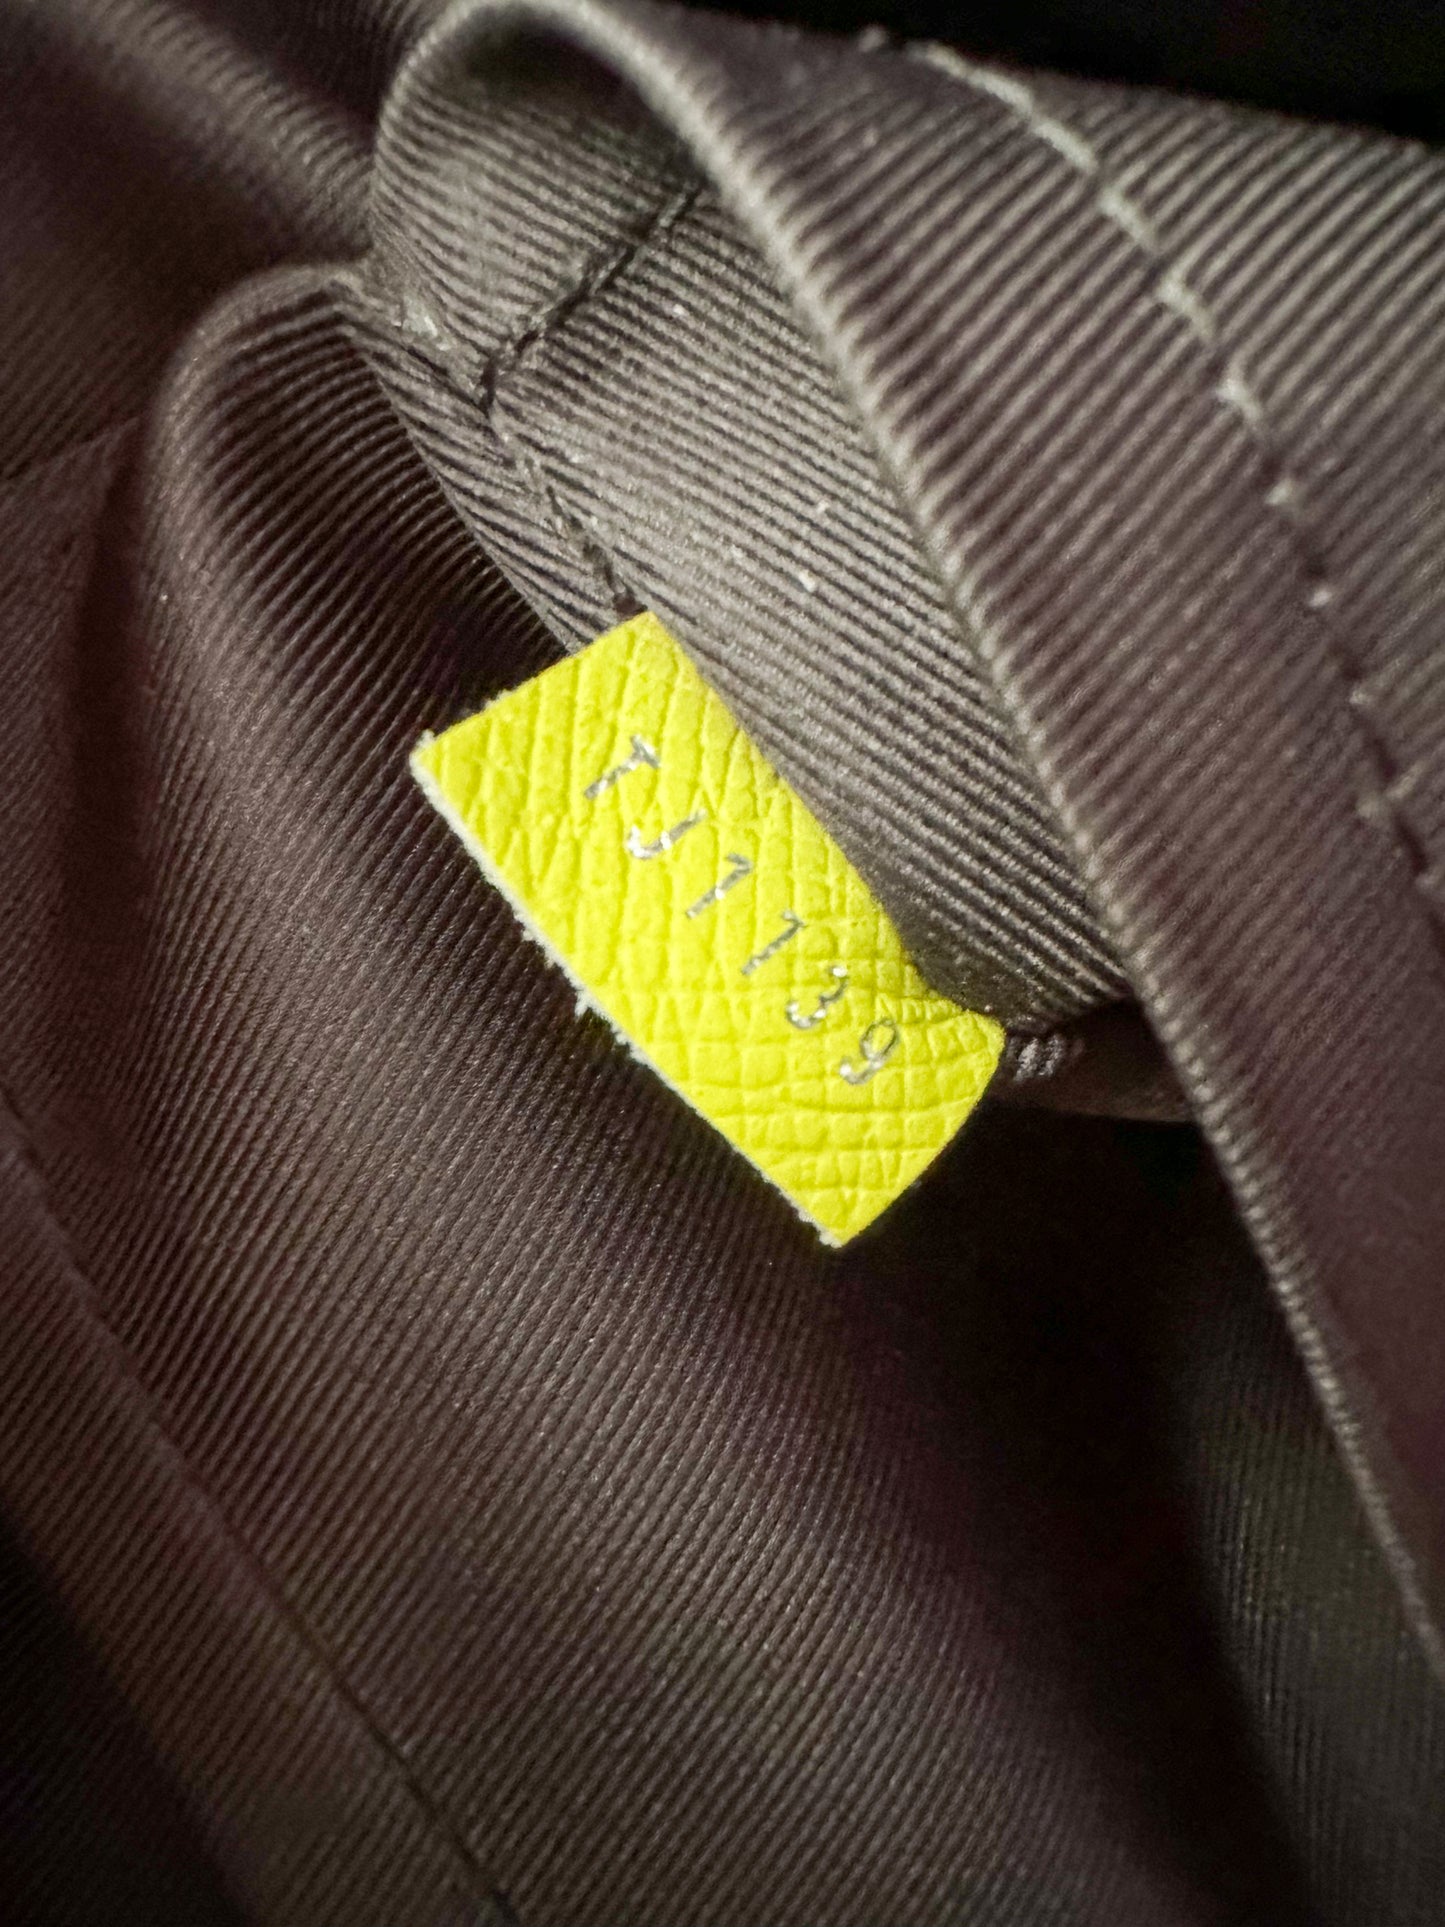 I bought my yellow LV Discovery Backpack in January 2020 and the